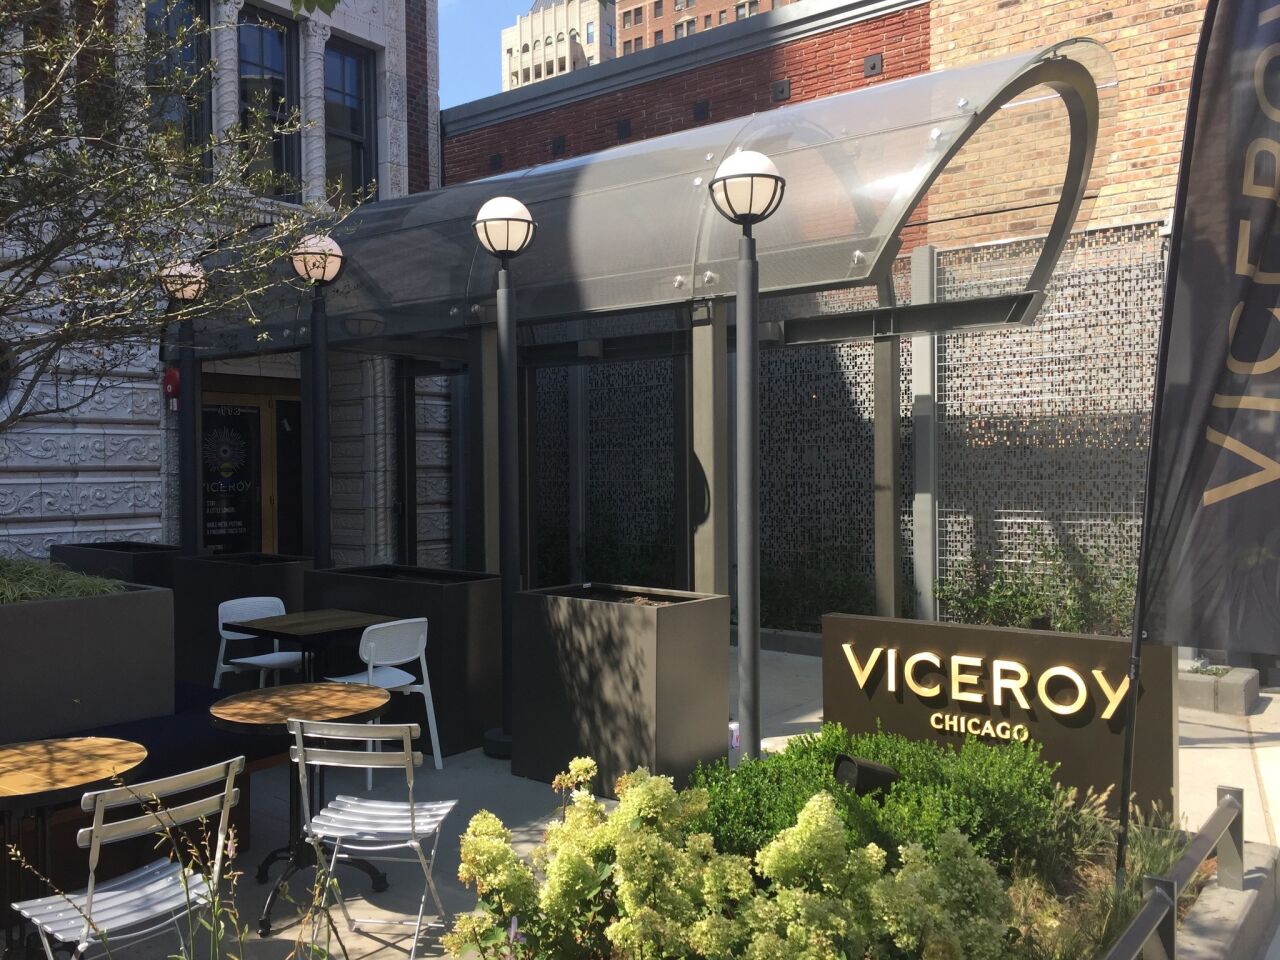 Viceroy Chicago is the first Midwest outpost of the modern-luxe hotel brand. The Los Angeles-based chain has 14 hotels in its portfolio. Three of the Chicago hotel's suites have terraces to take in the sweeping city views.